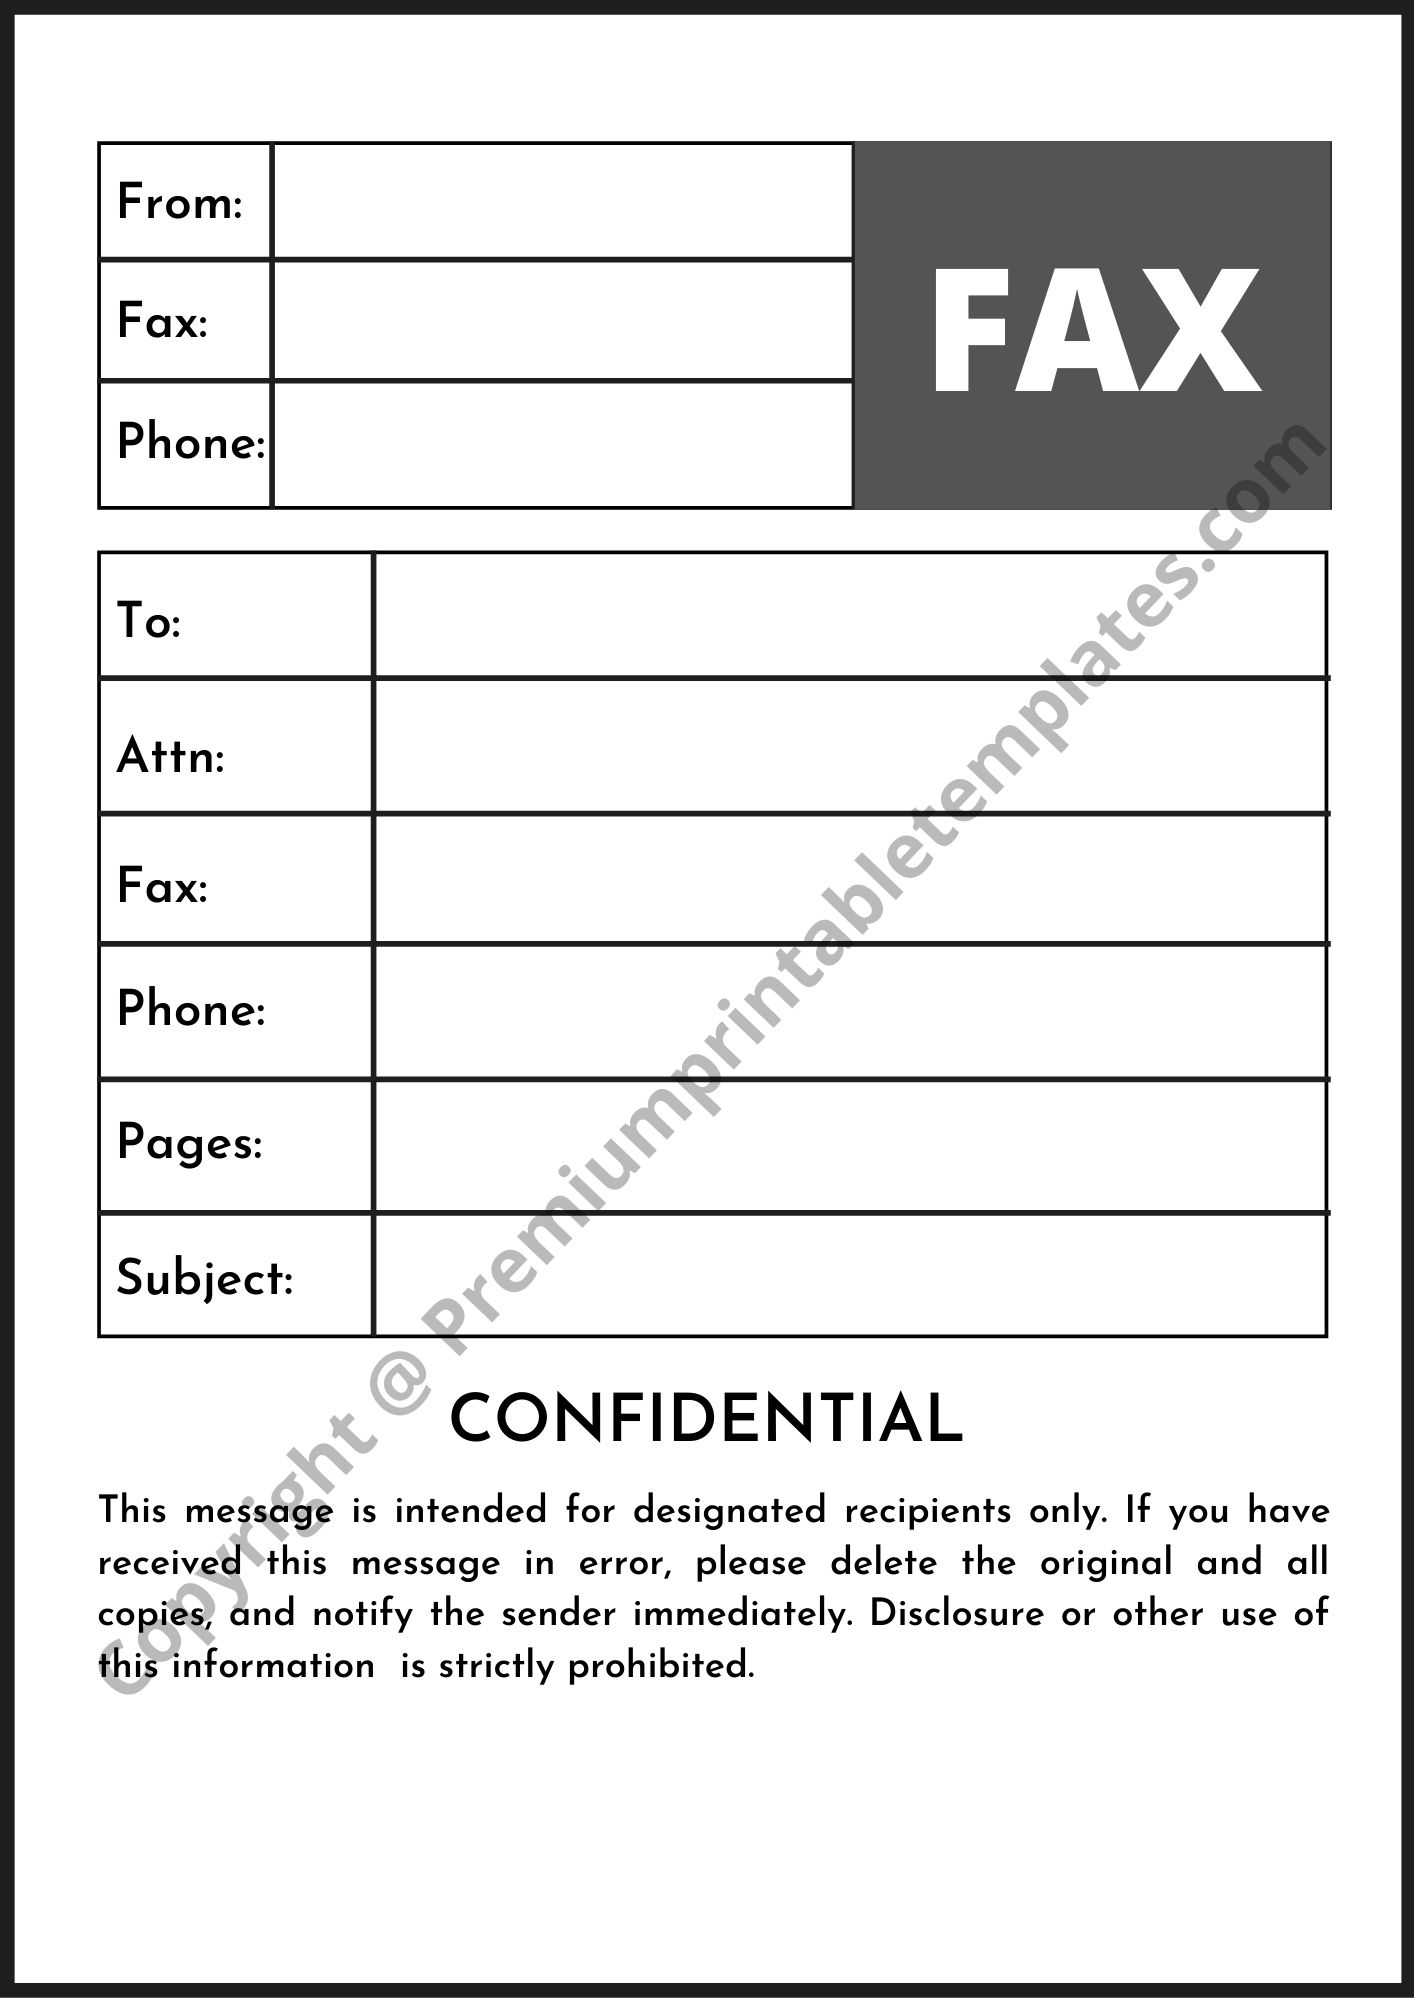 confidential fax cover sheet template in pdf word